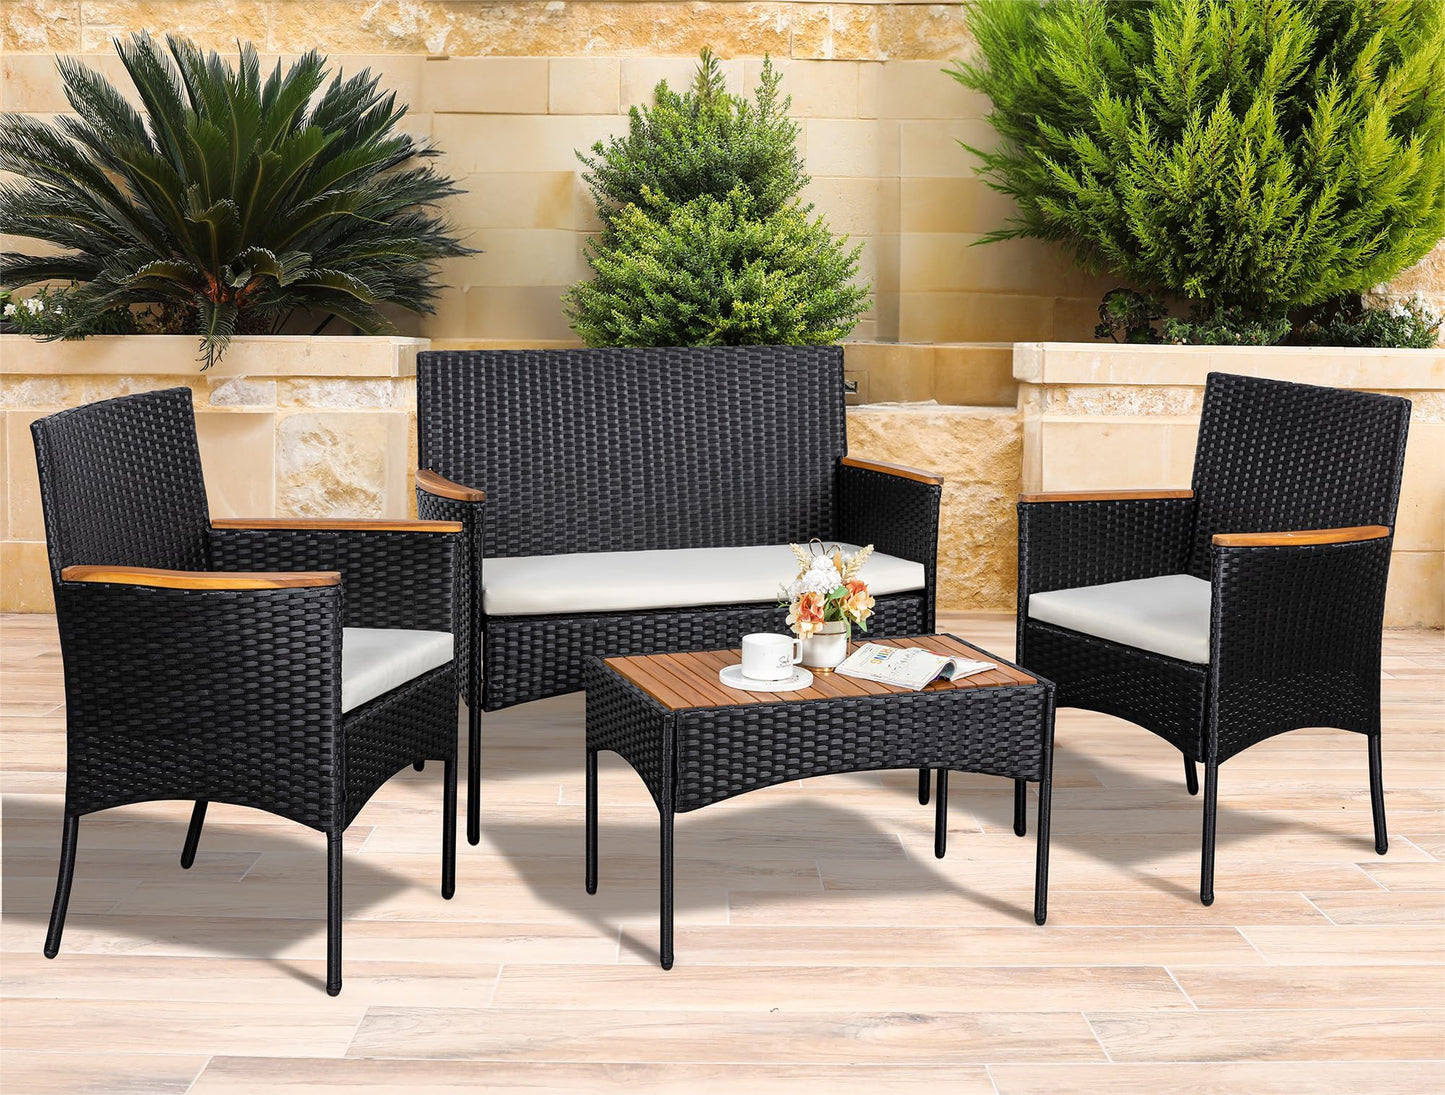 JAMFLY Patio Furniture Set 4 Piece Conversation Set Outdoor Wicker Rattan Chairs Backyard Pool Garden Porch Balcony Patio Loveseat with Cushions and Table, Black/Beige